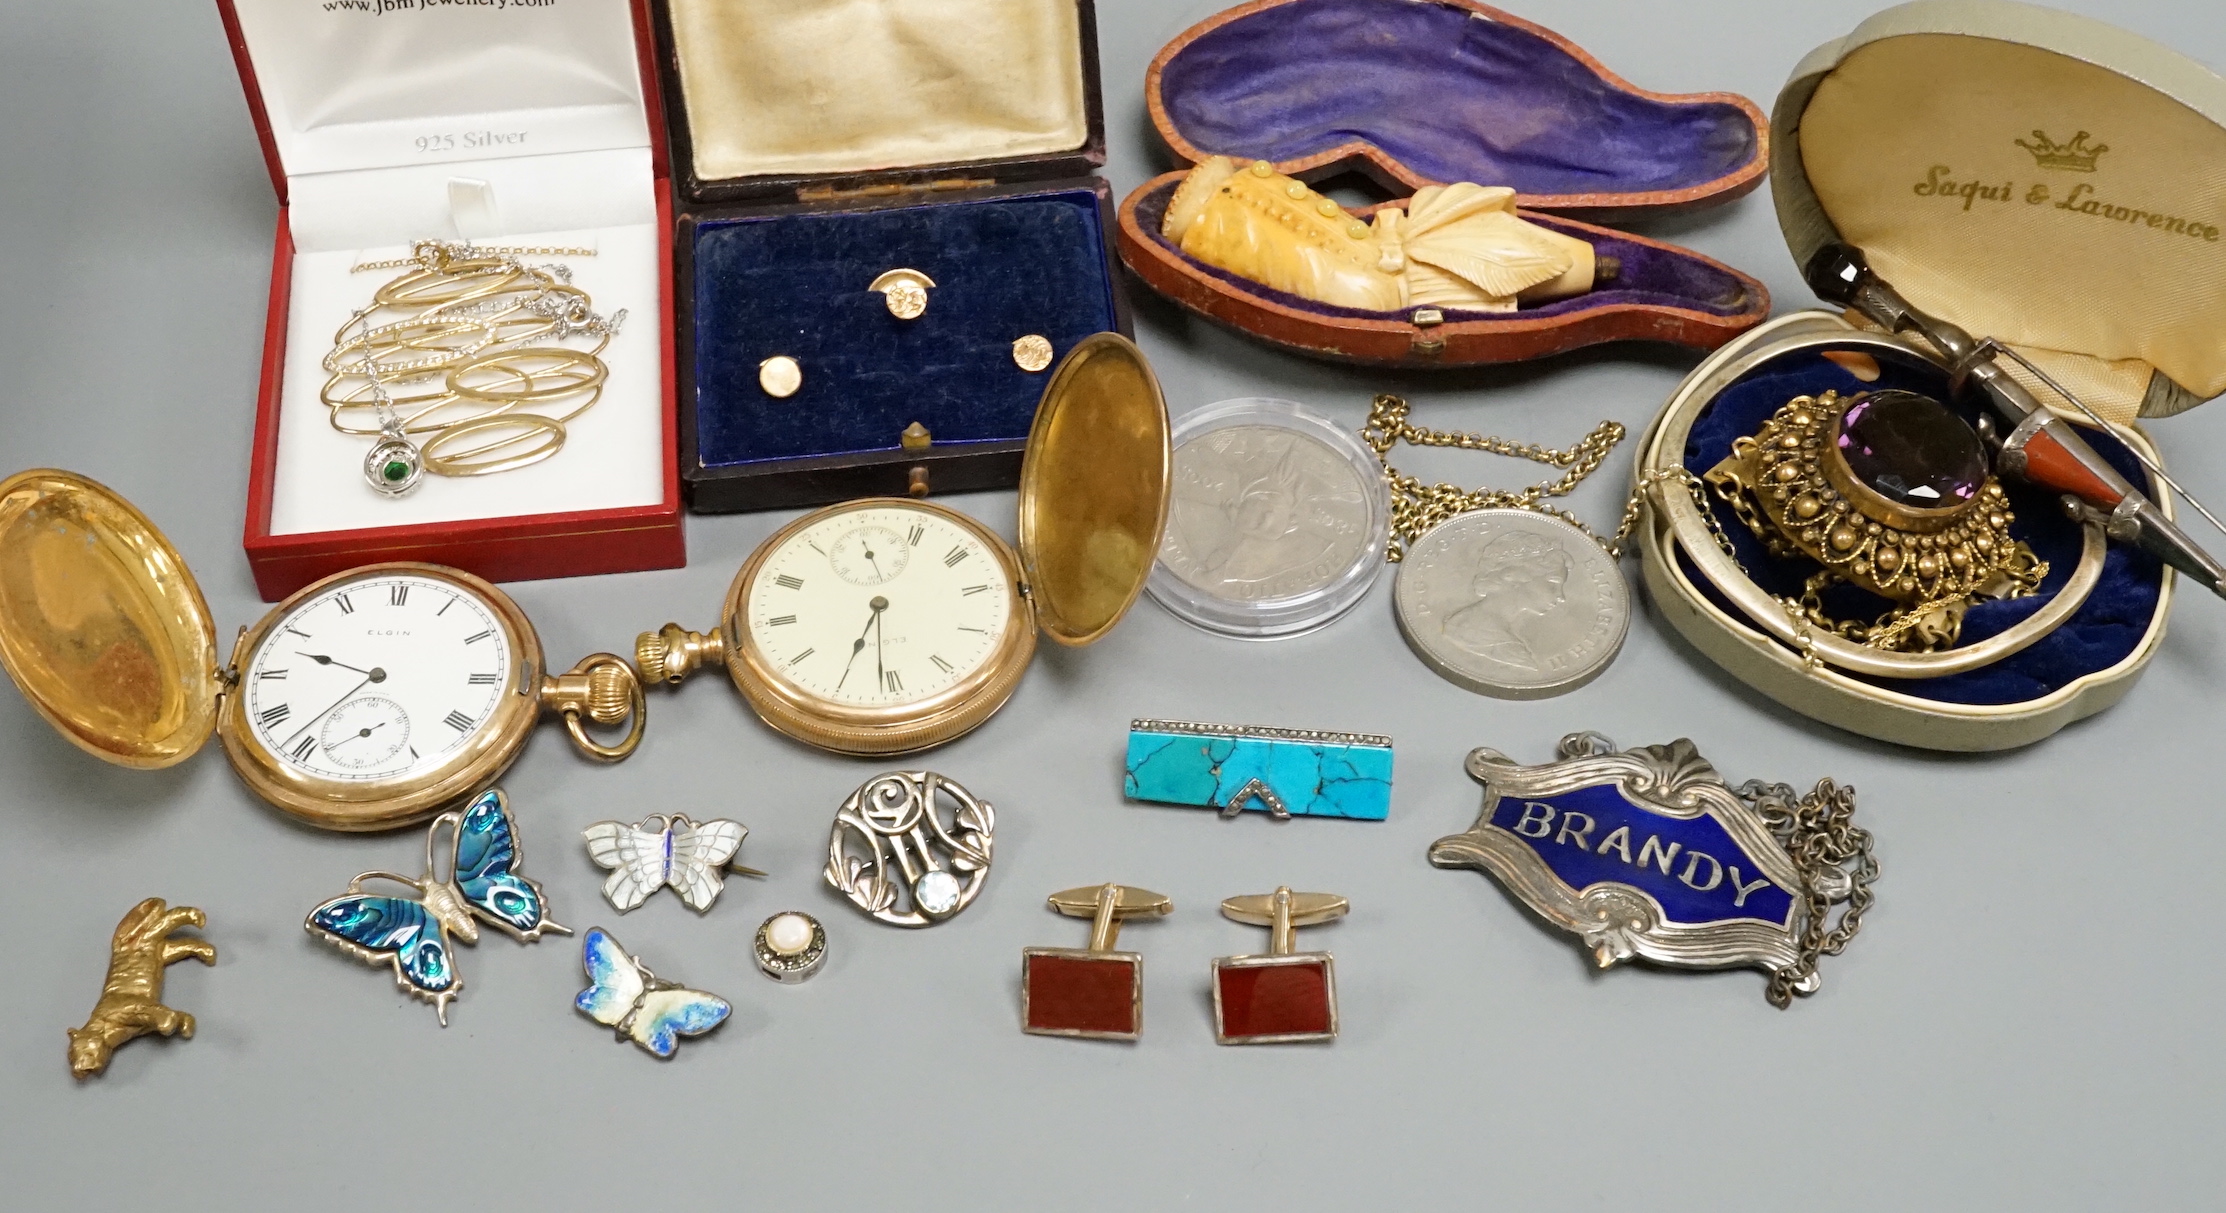 A small quantity of jewellery and other items including Scottish hardstone set dirk brooch, coins, meerschaum pipe, pocket watch etc.